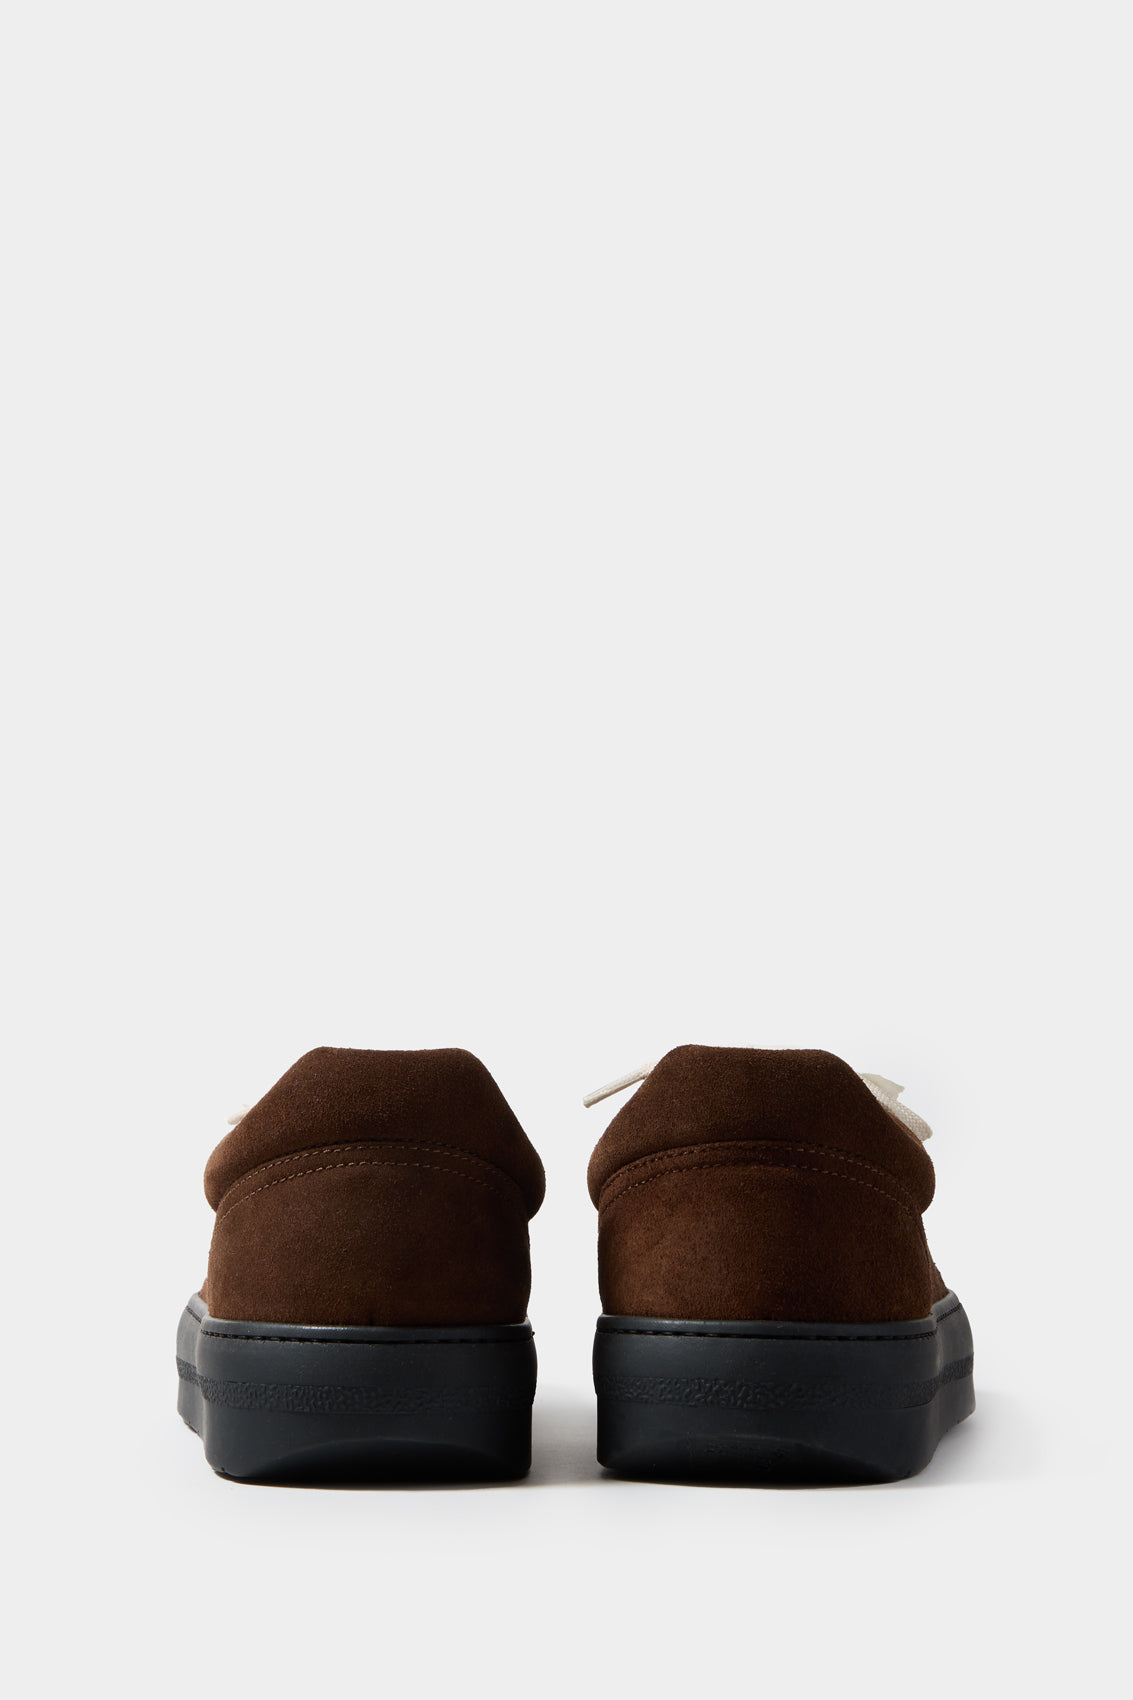 DREAMY SHOES / suede / chocolate